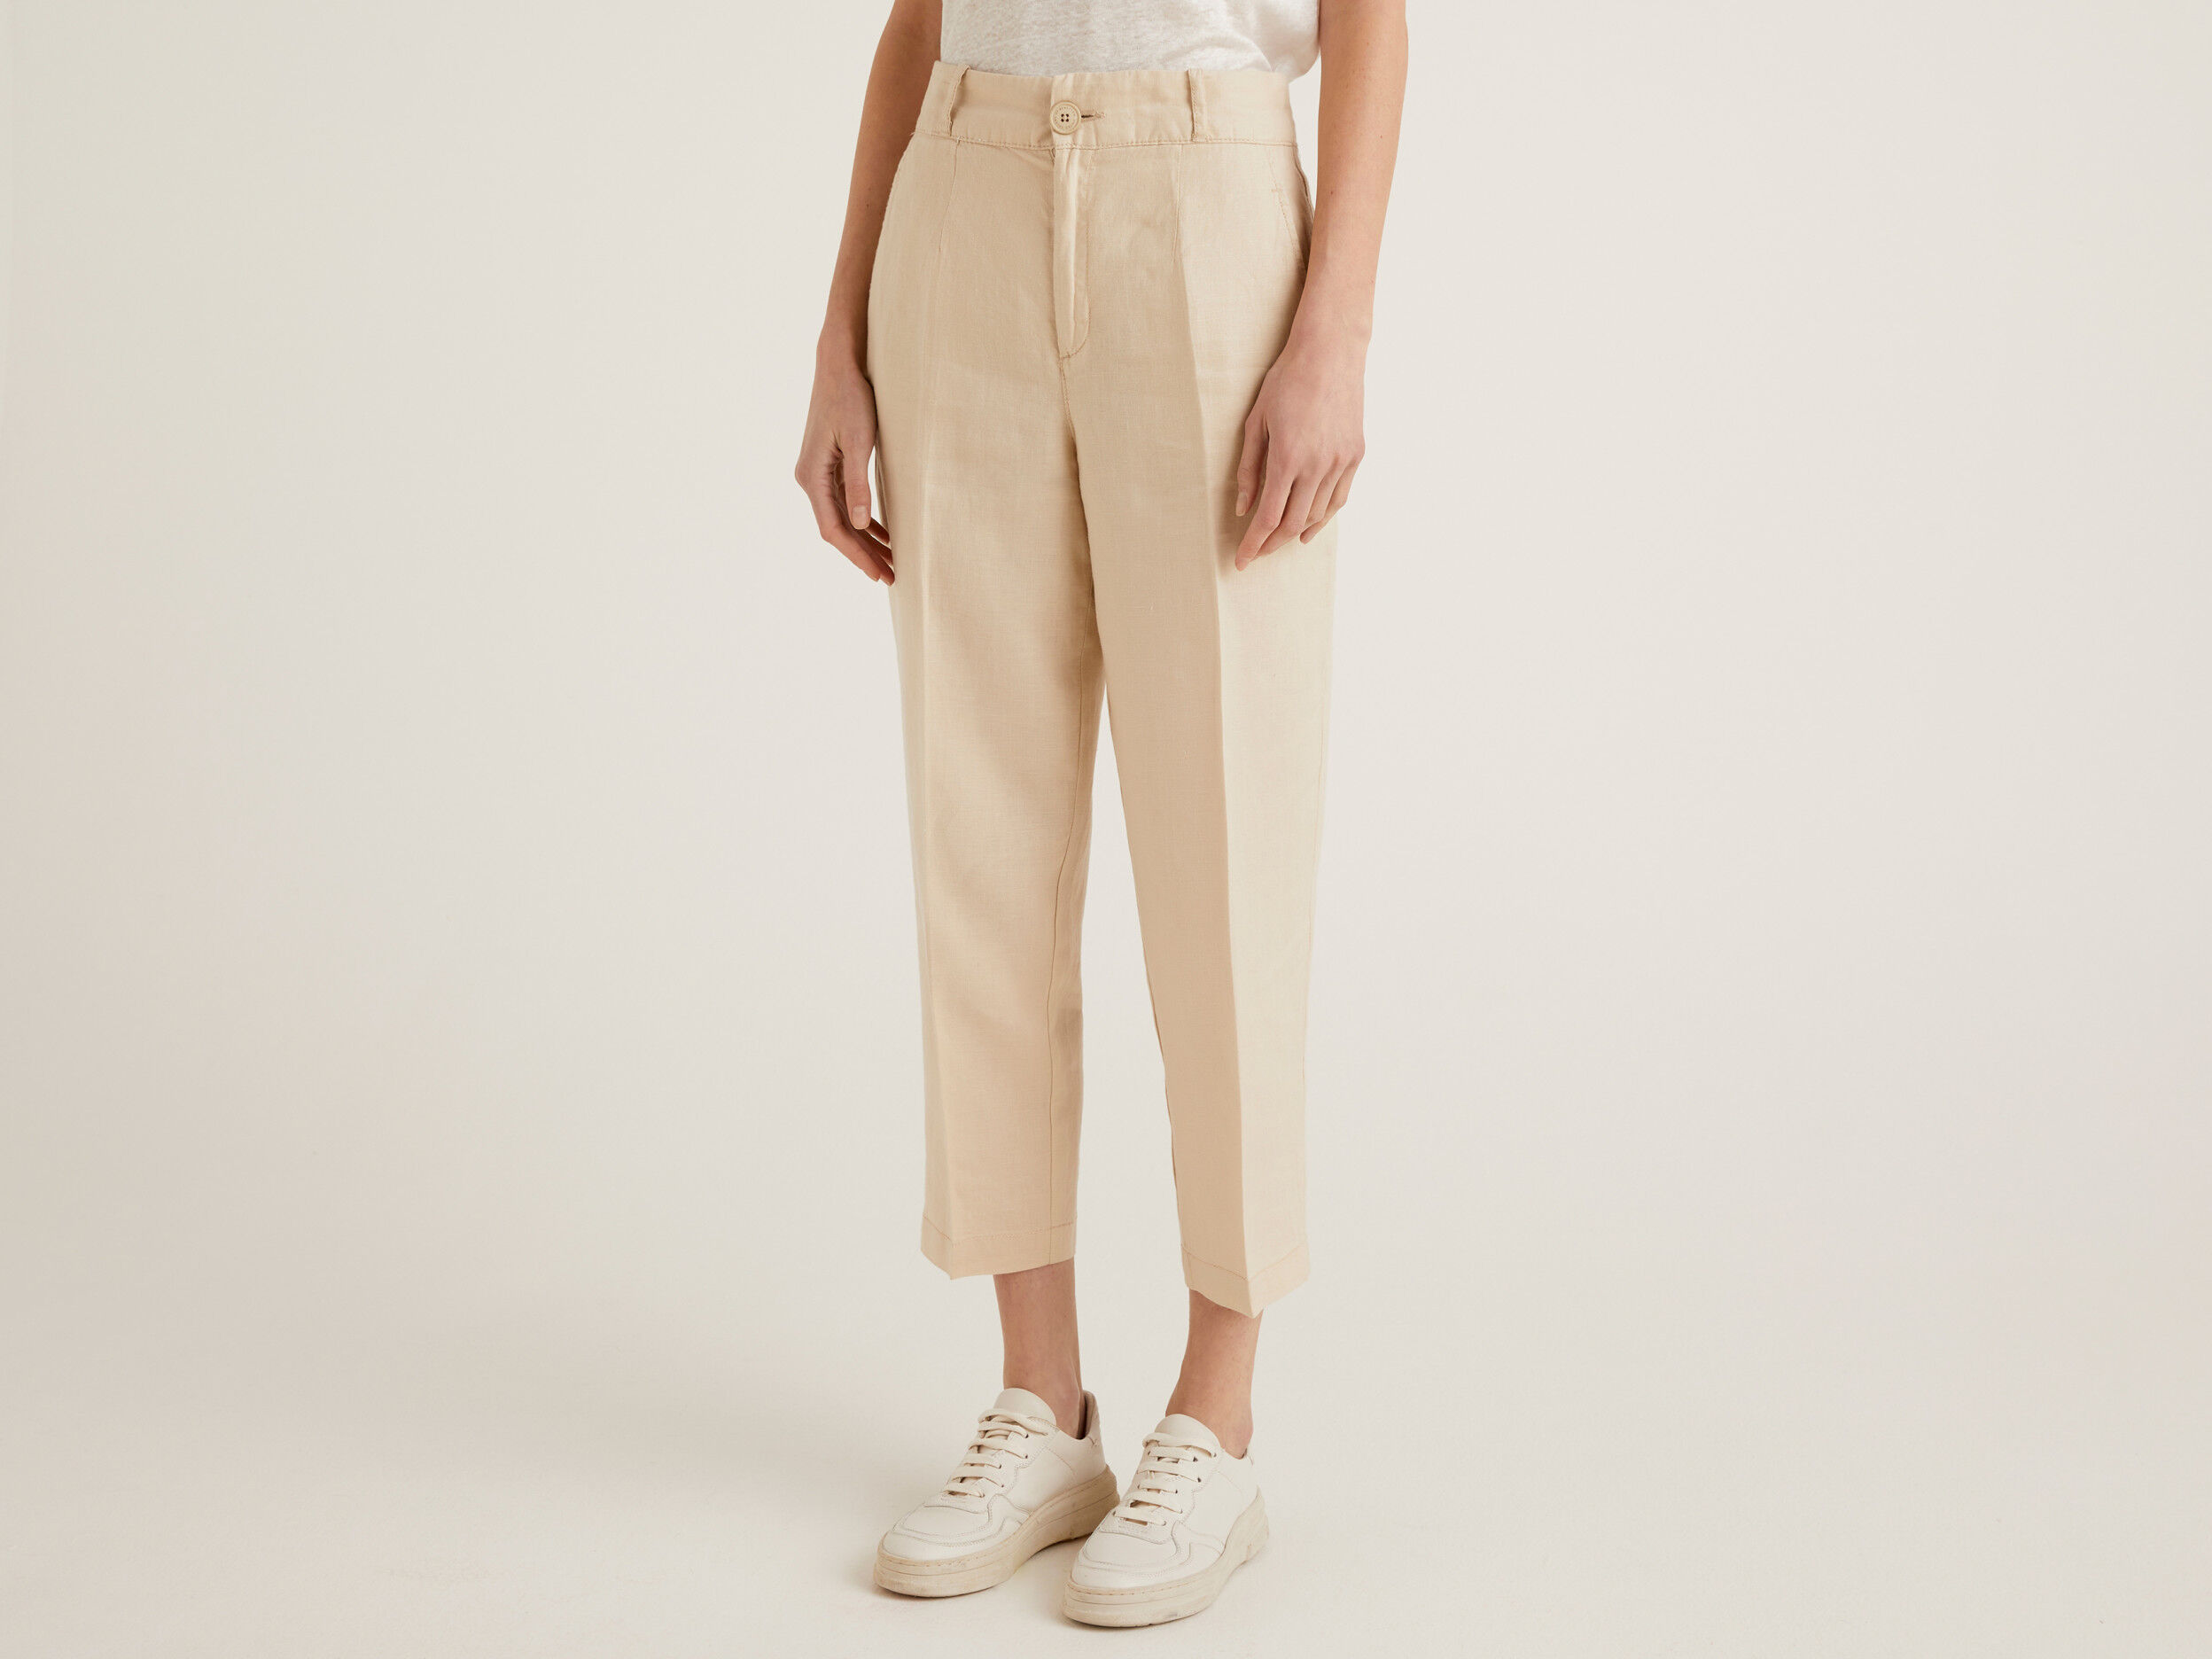 Womens Trousers Forte Forte Linen Trouser in Beige Slacks and Chinos Forte Forte Trousers Slacks and Chinos Natural 